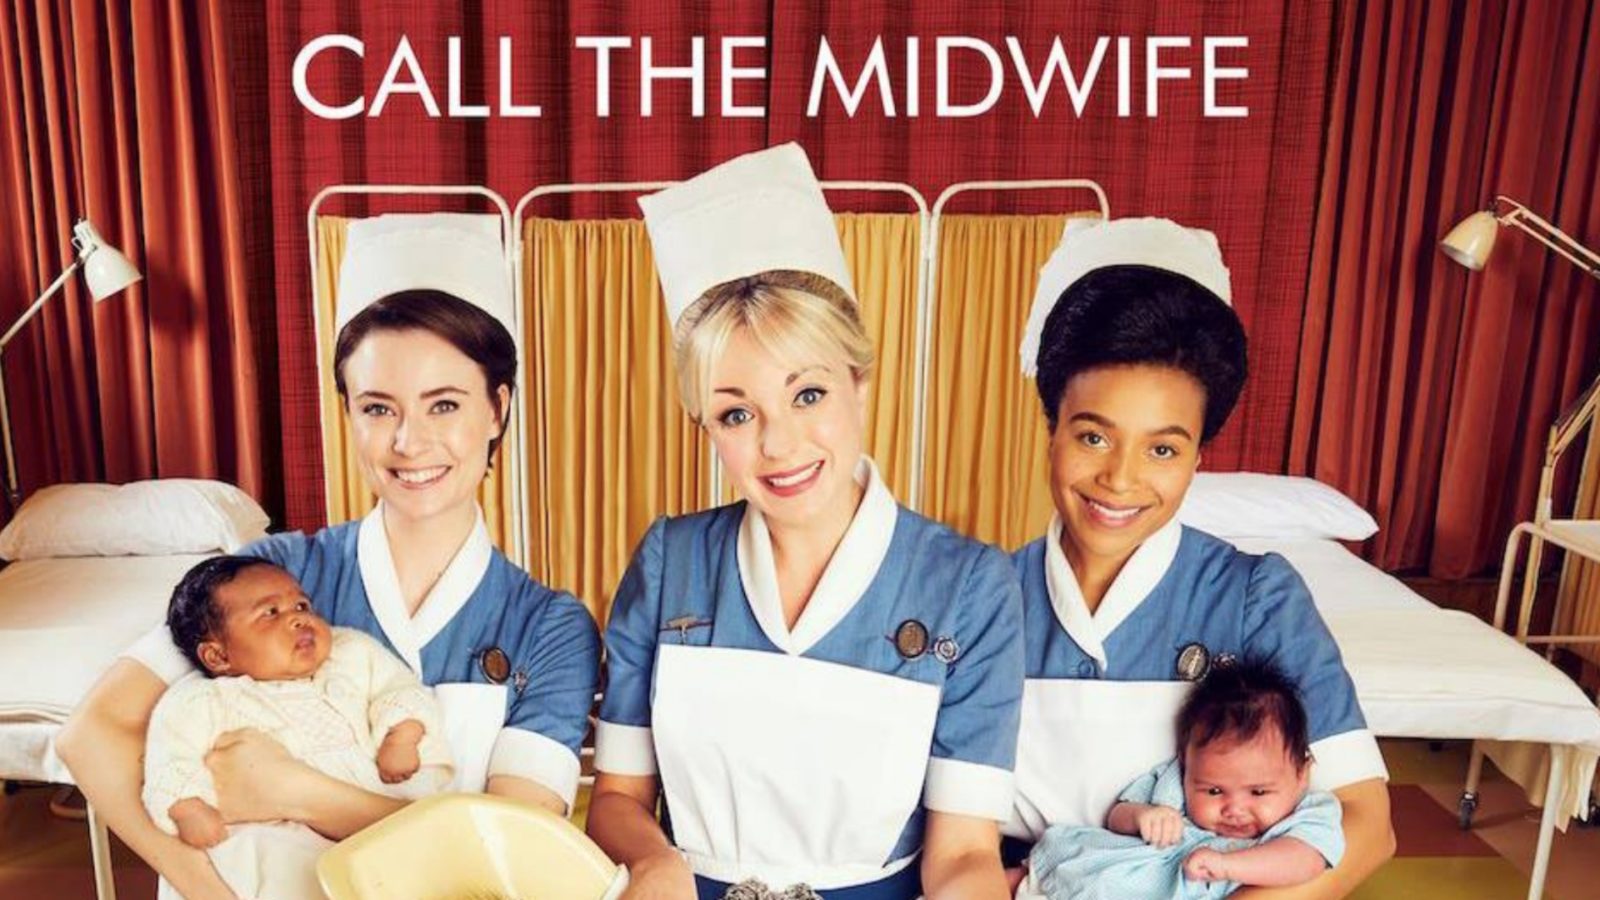 Call the Midwife' Season 10: Release Date and Updates!